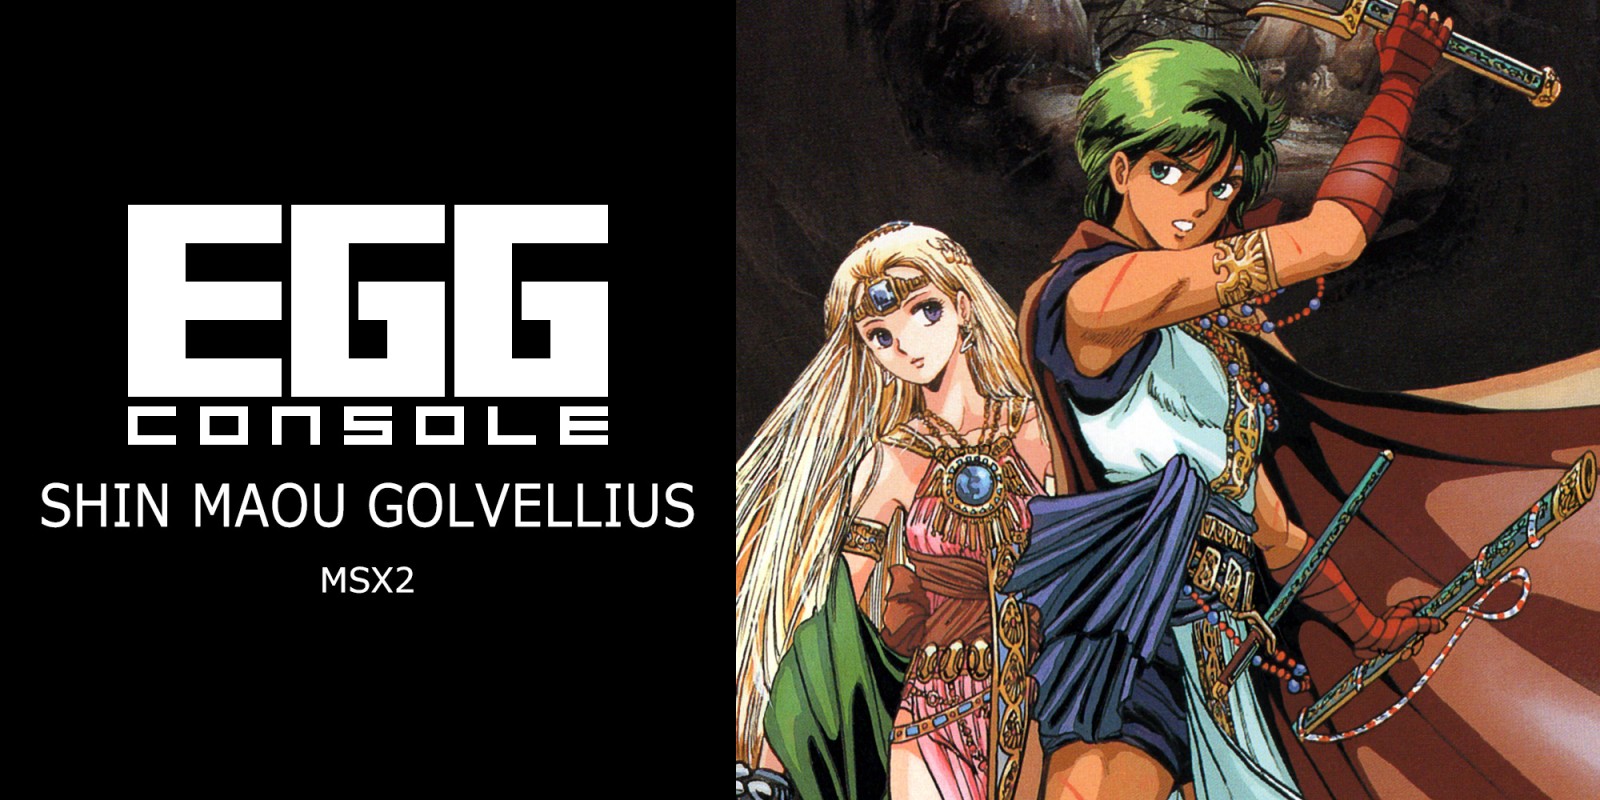 The good old RPG Shin Maou Gollellius is coming to Nintendo Switch